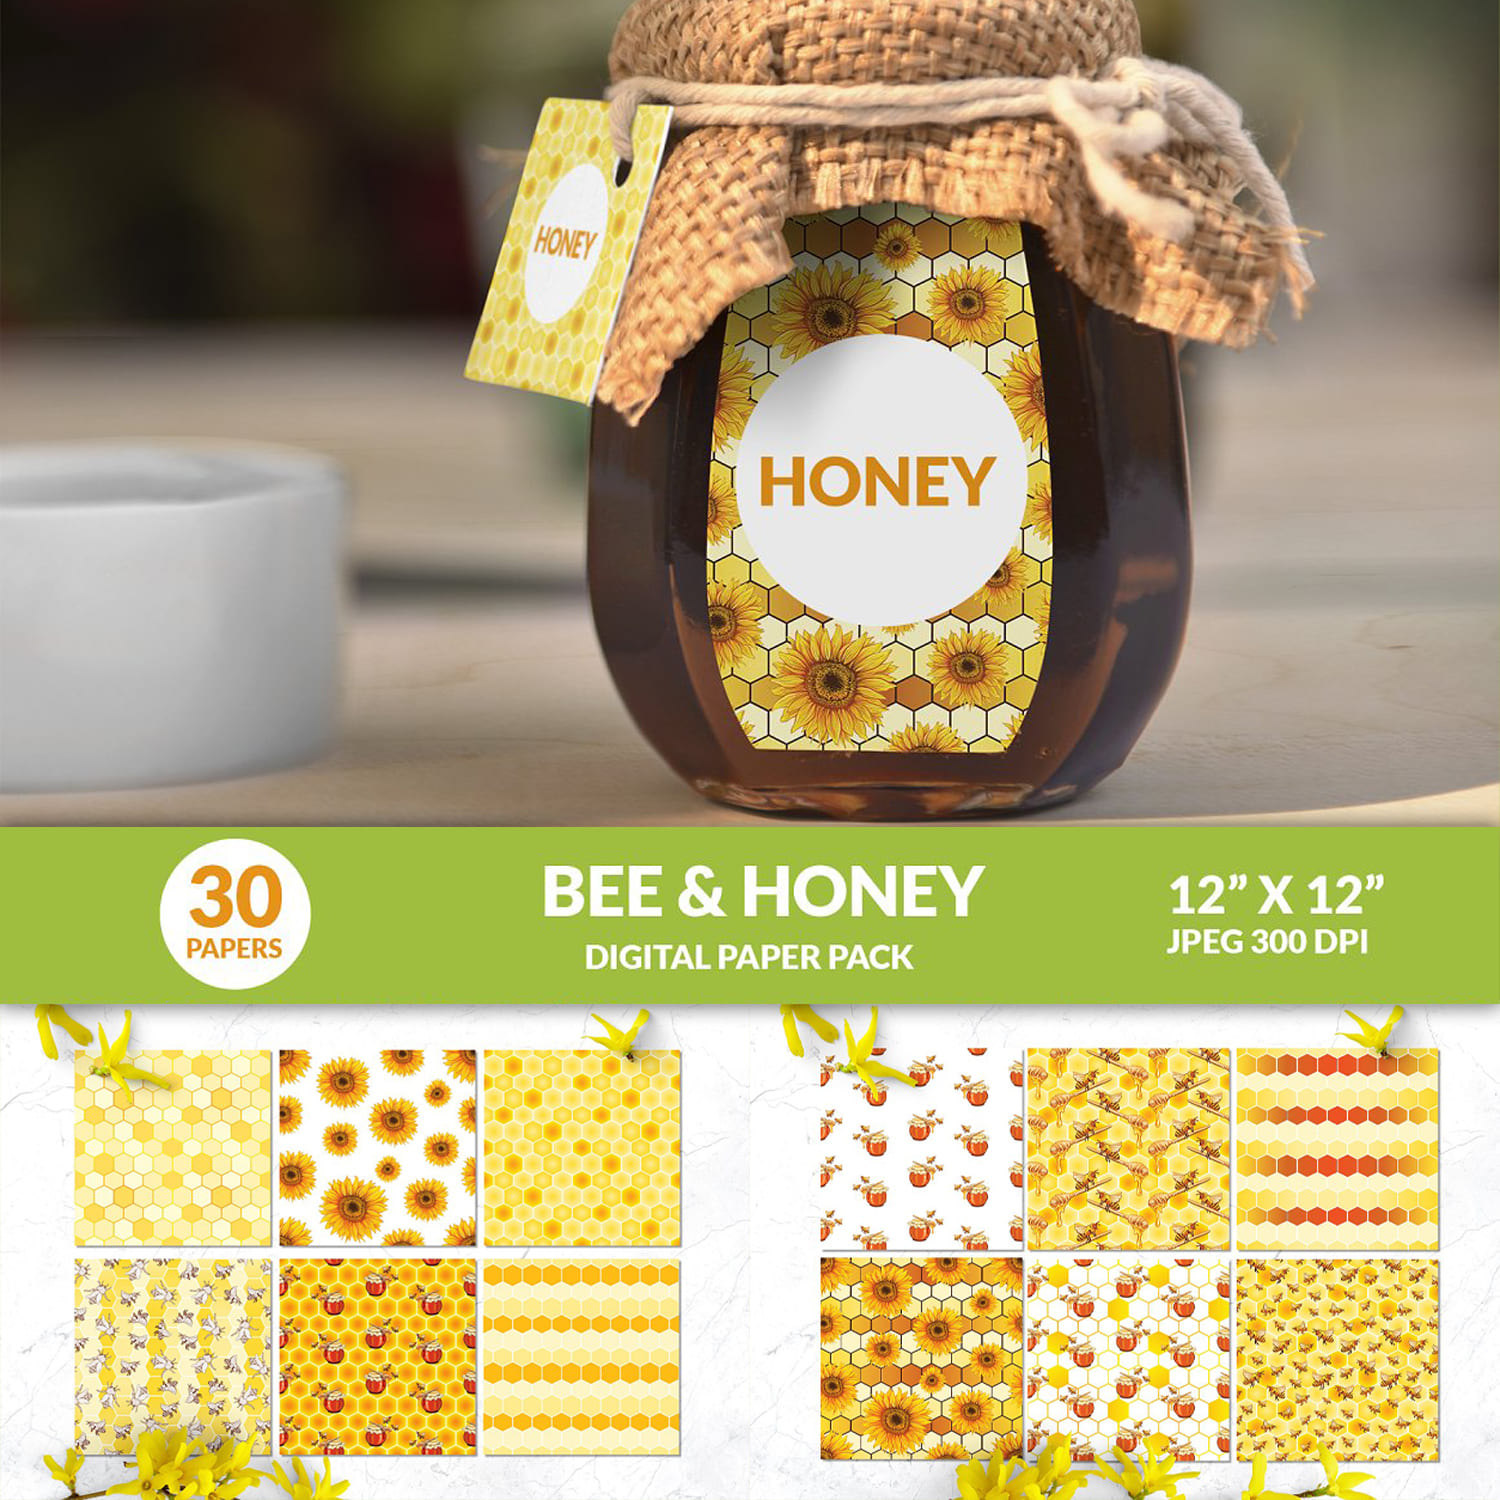 30 amazing bee & honey JPEG digital papers for your creative projects.